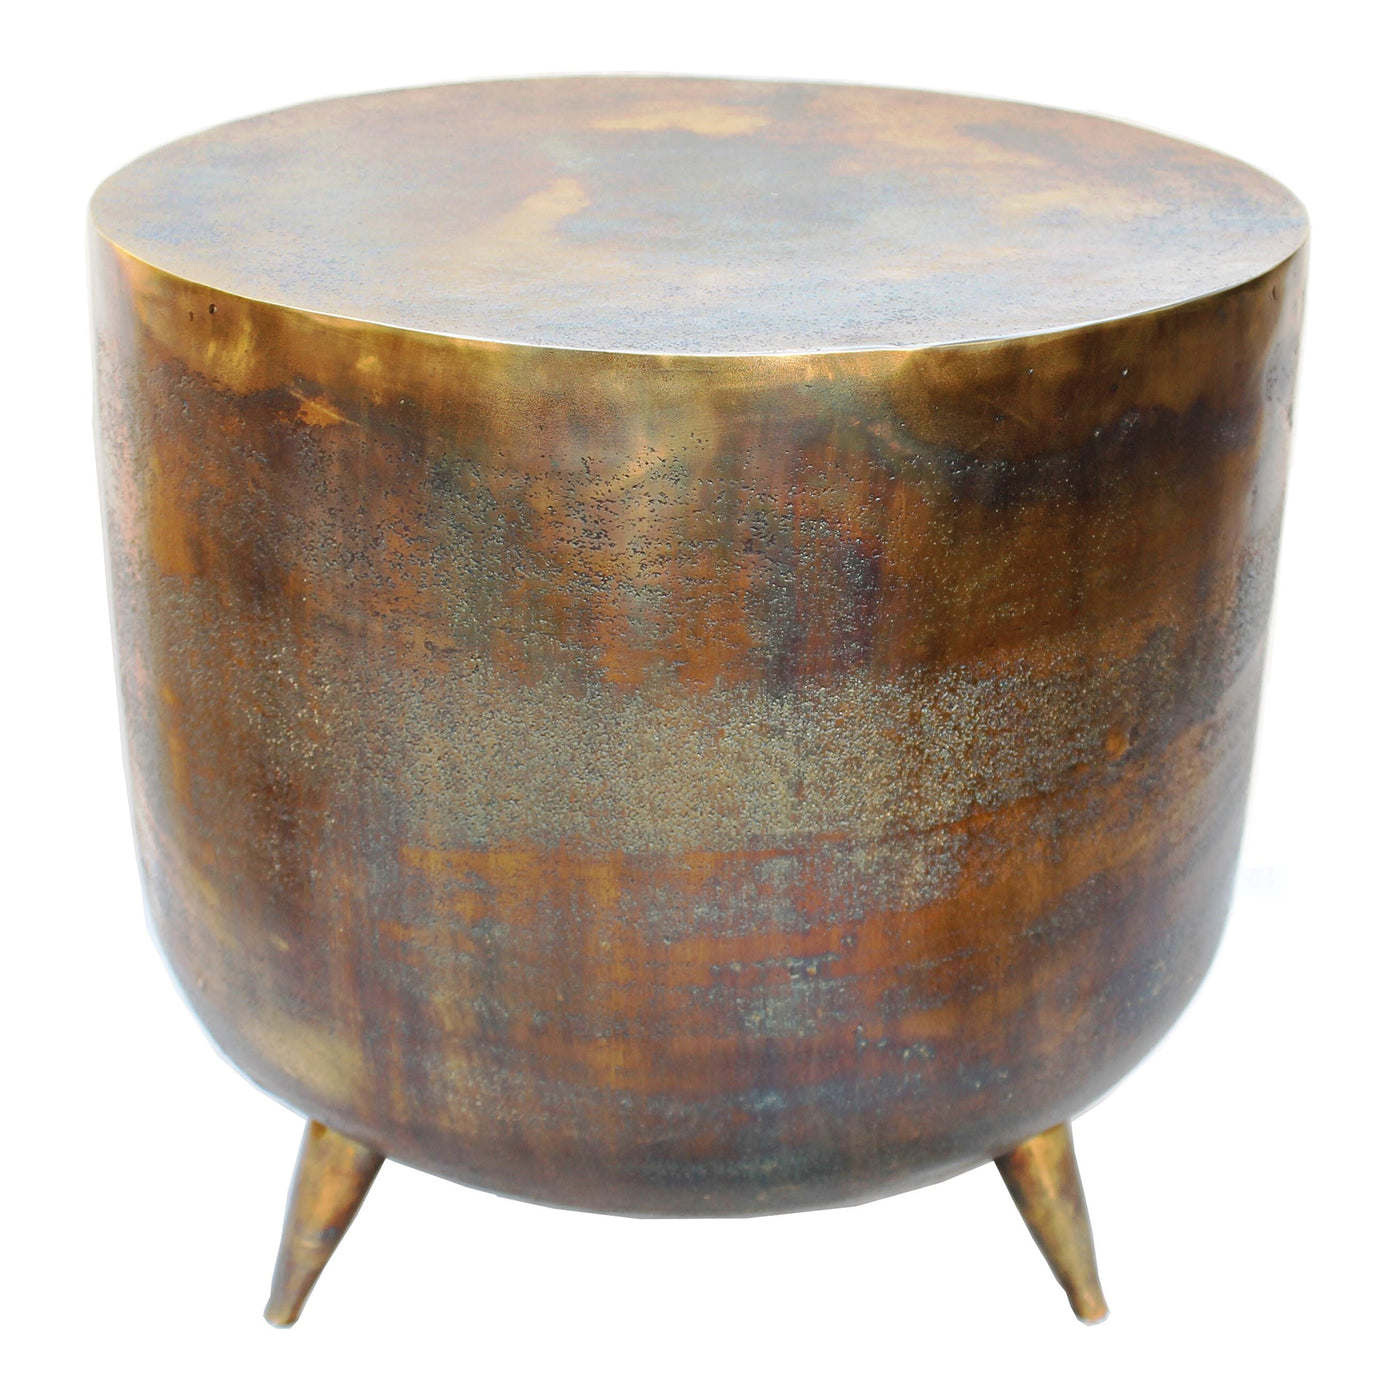 A unique accent table that is bound to make an impact on your decor. With tones of gold and copper, this drum-style table ...